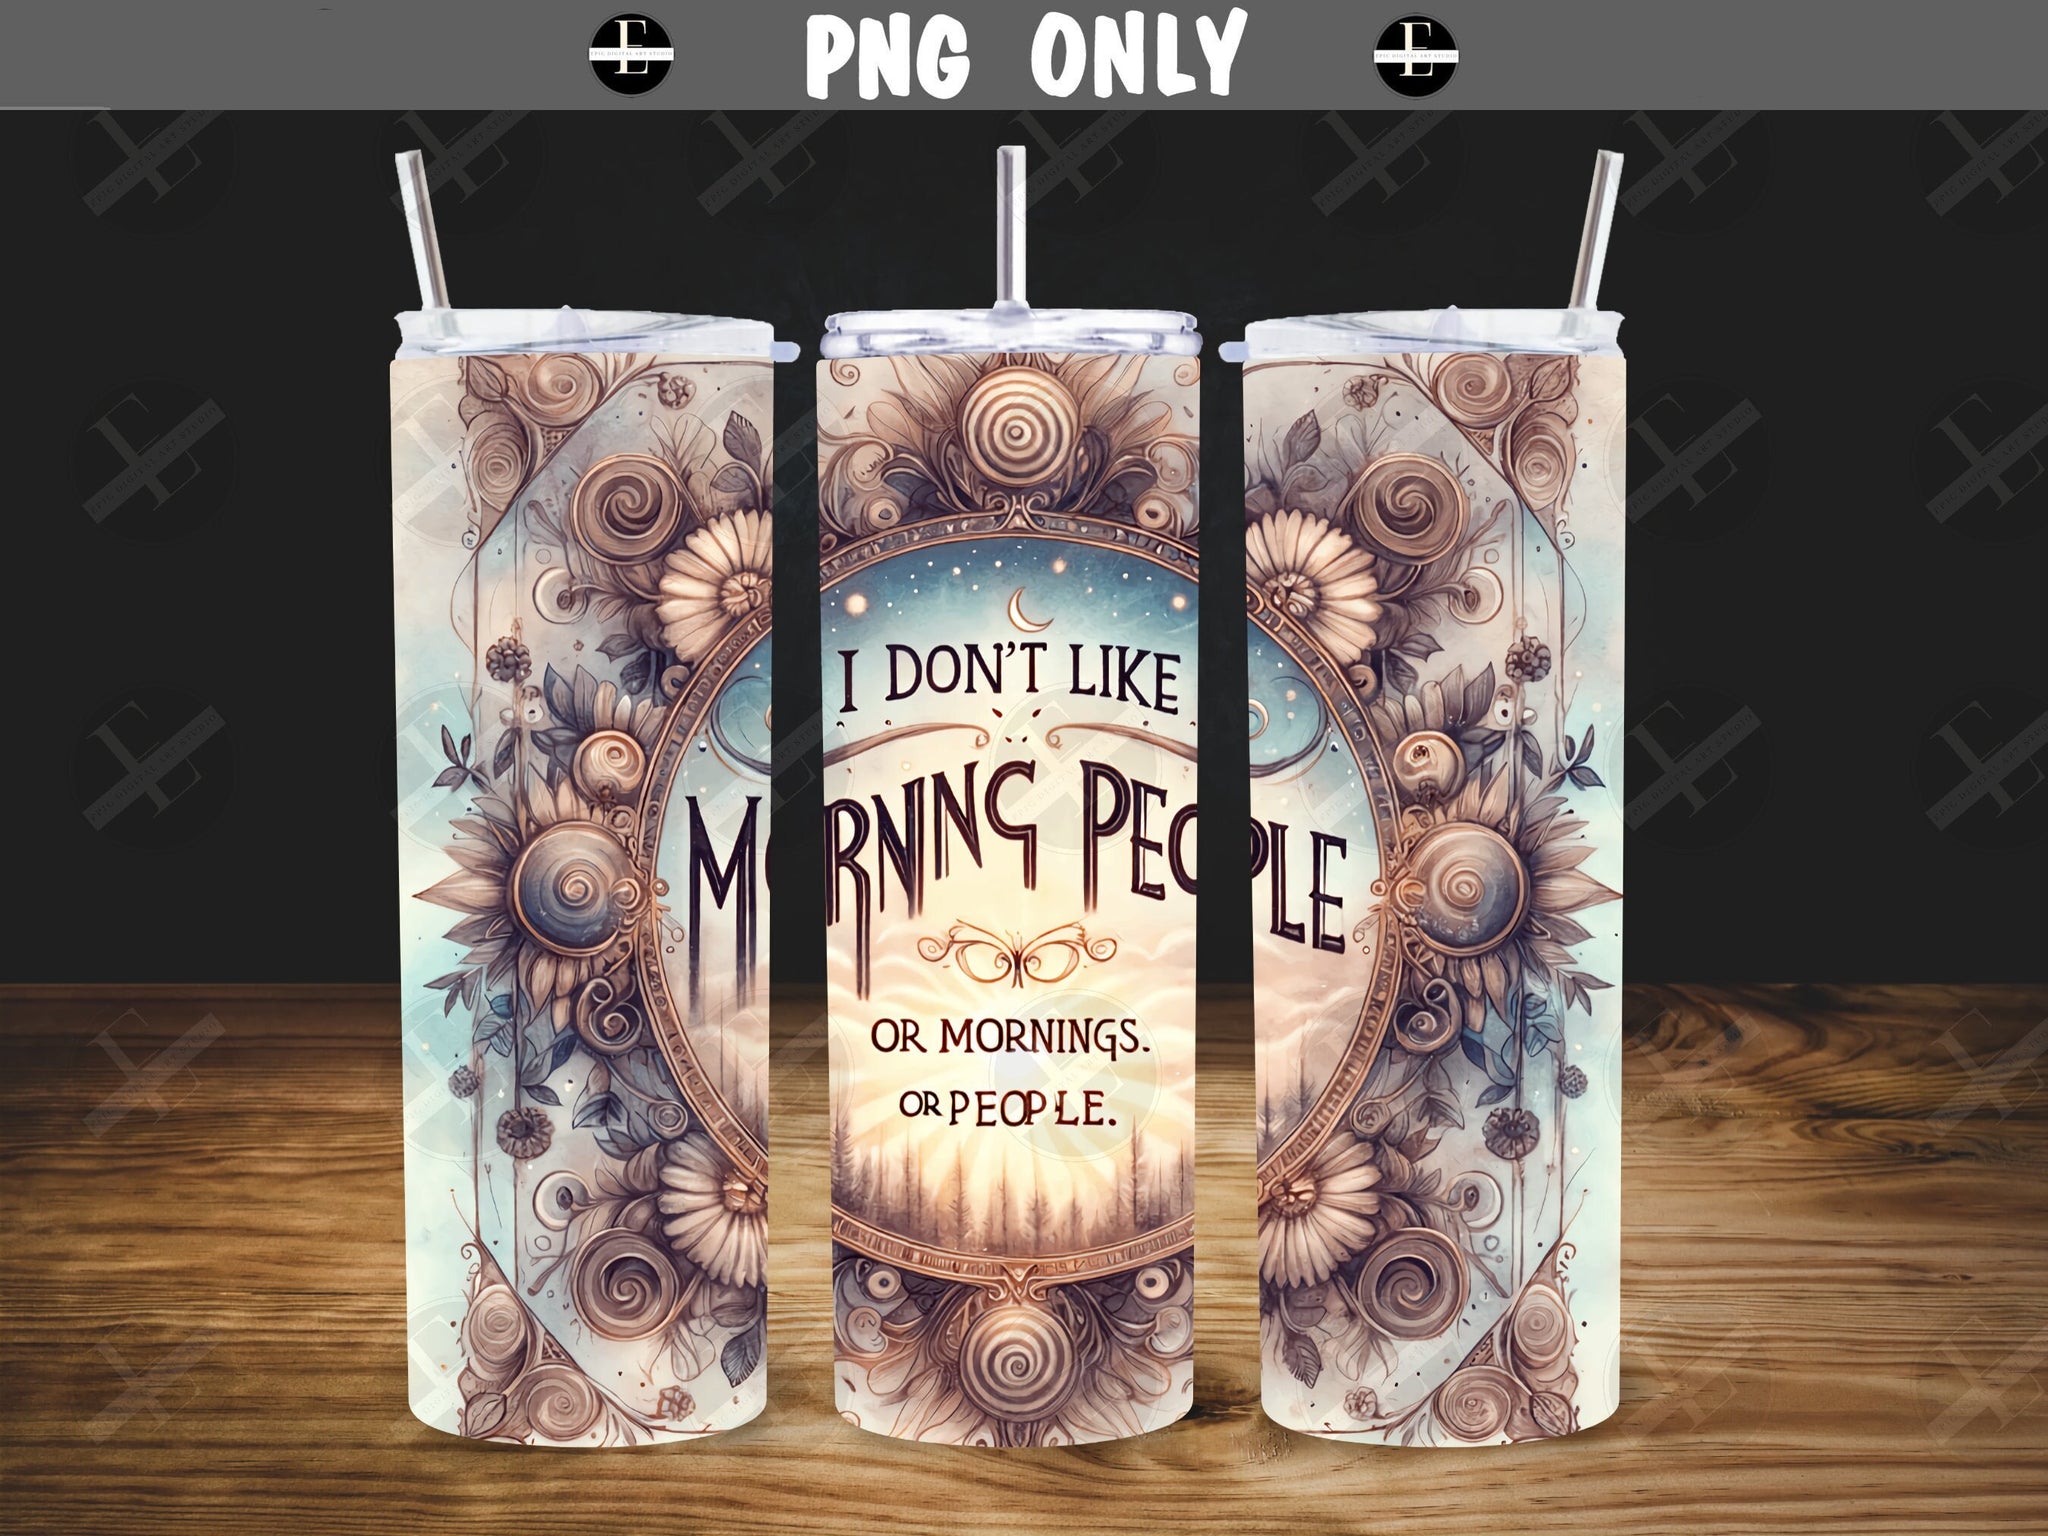 i dont like morning people or mornings or people 20ozs wrap design, 20ozs skinny wraps, 20ozs wraps designs, tumbler 20ozs wraps, tumbler wrap 20ozs, wrap design 20ozs, wrap png design 20ozs, funny 20ozs wraps, 20ozs tumbler wrap